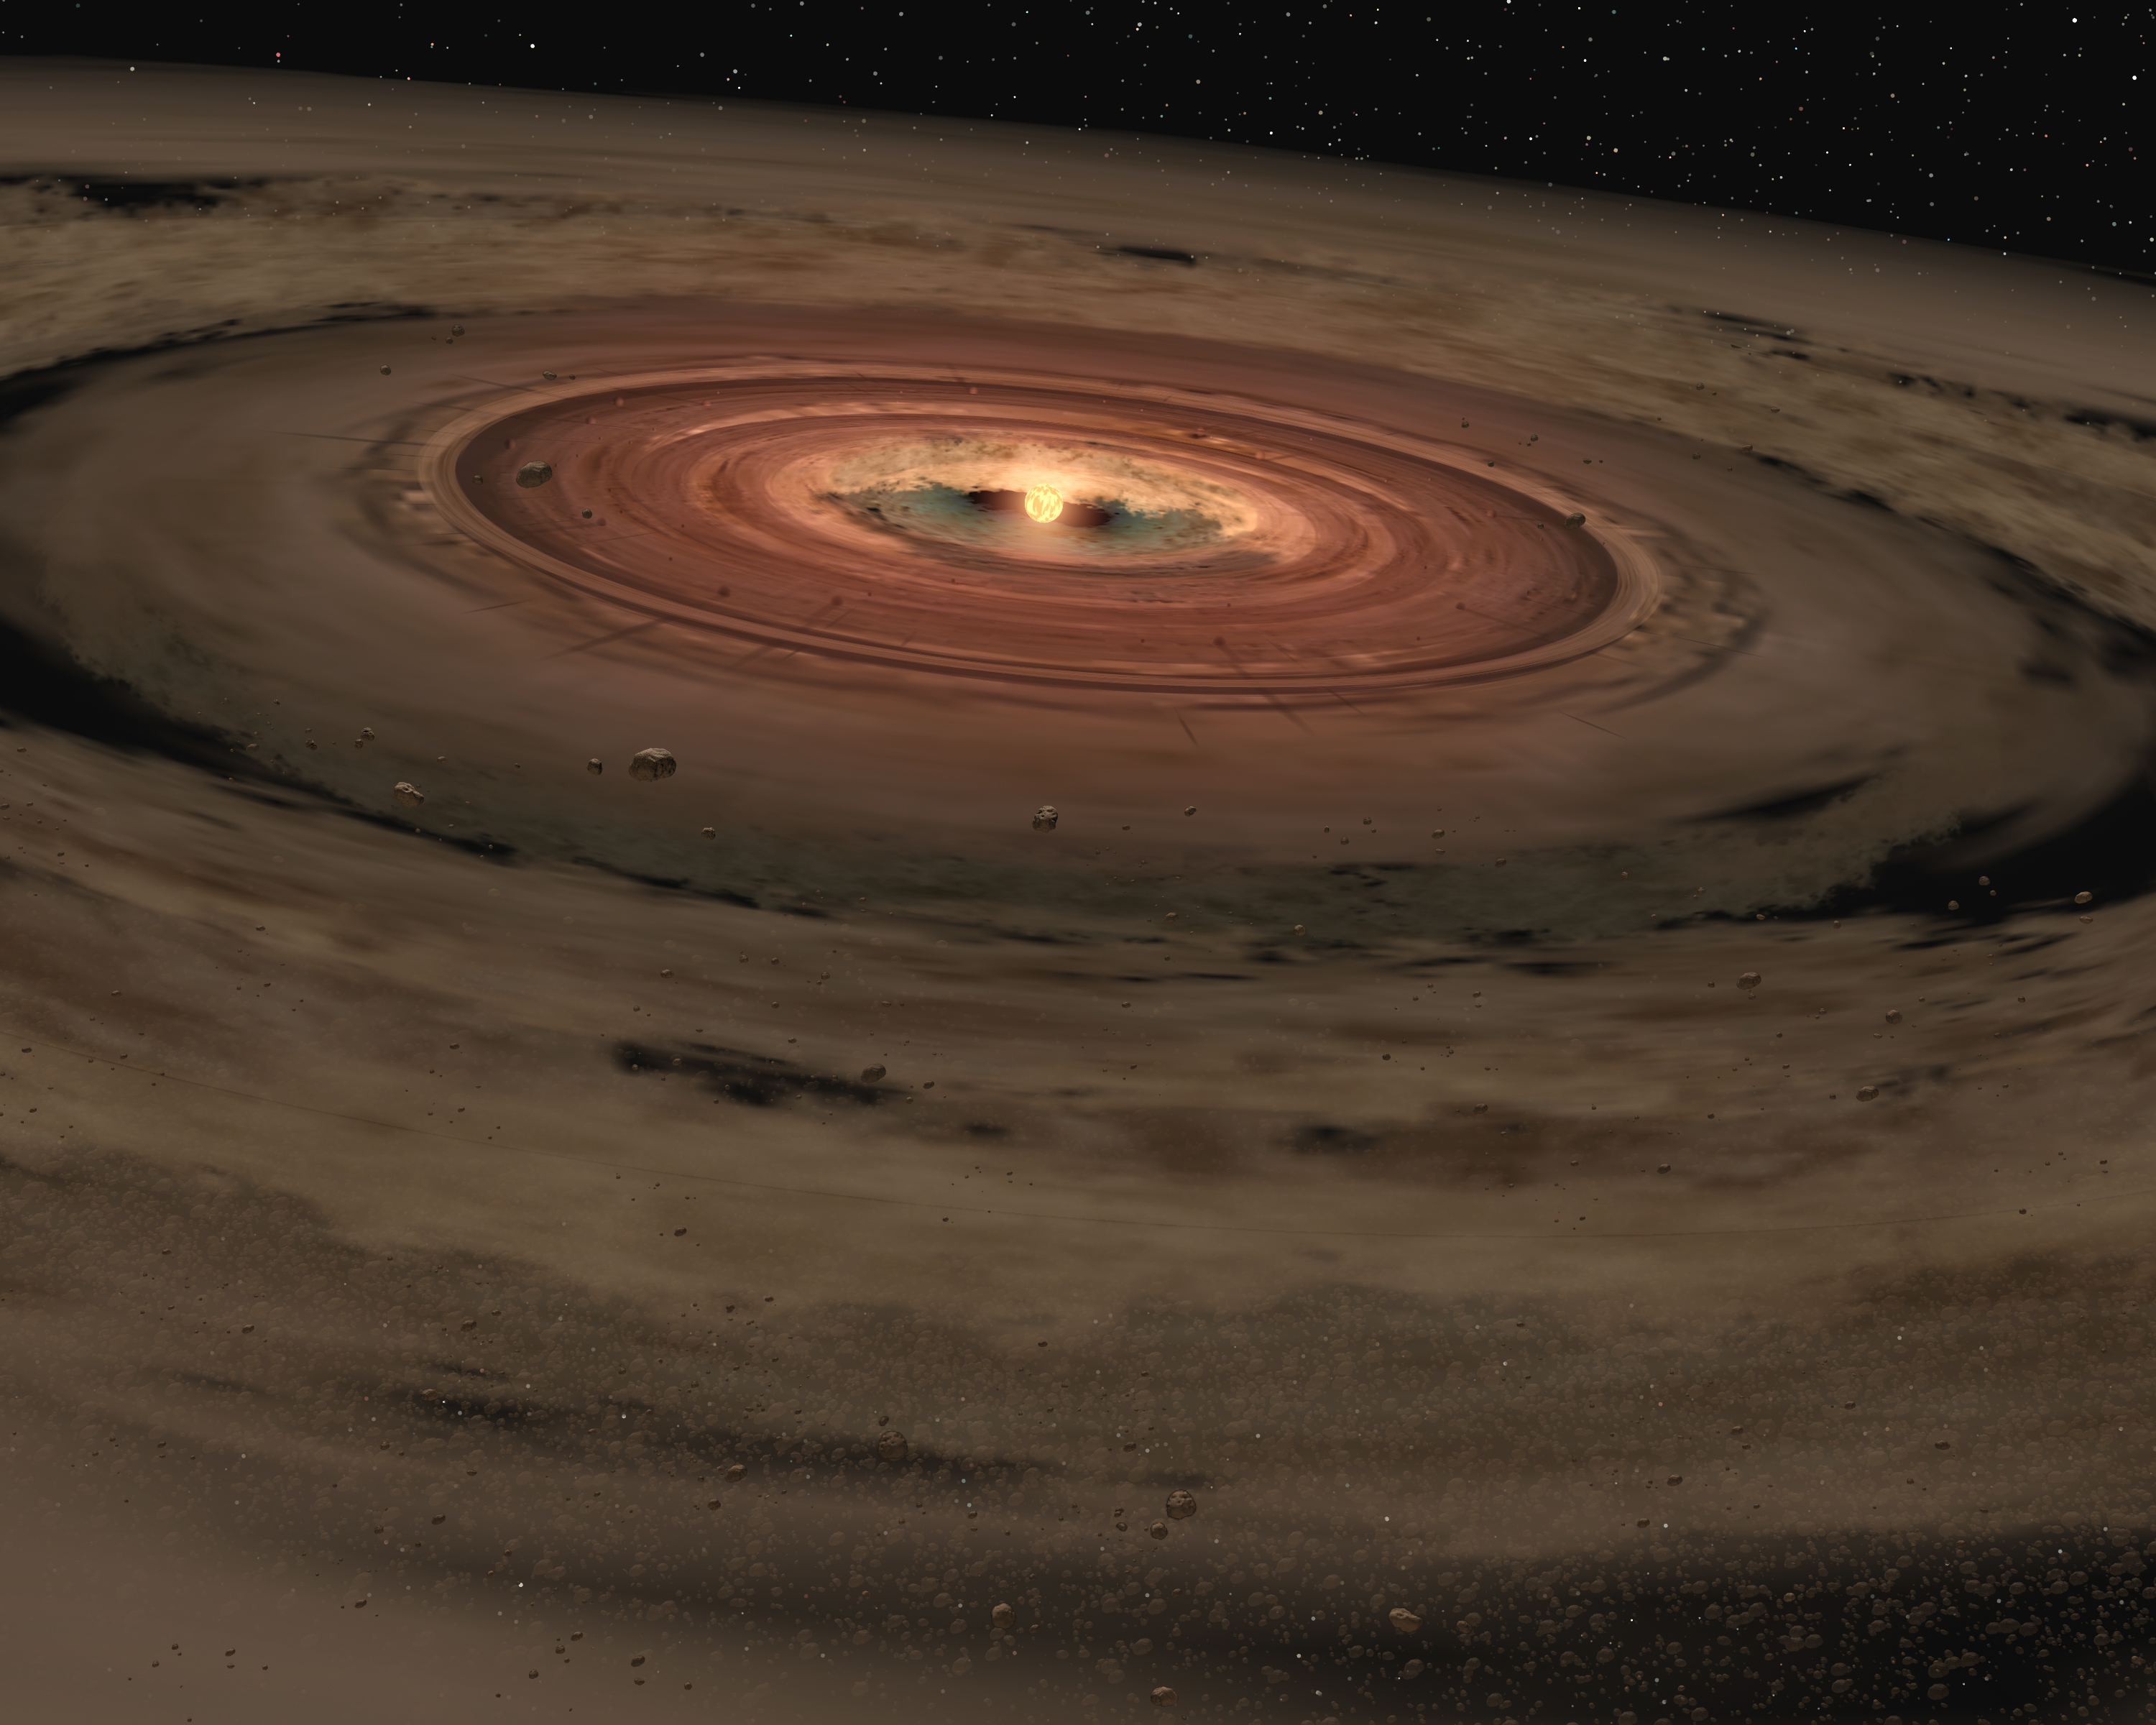 Brown dwarf OTS 44 with disc